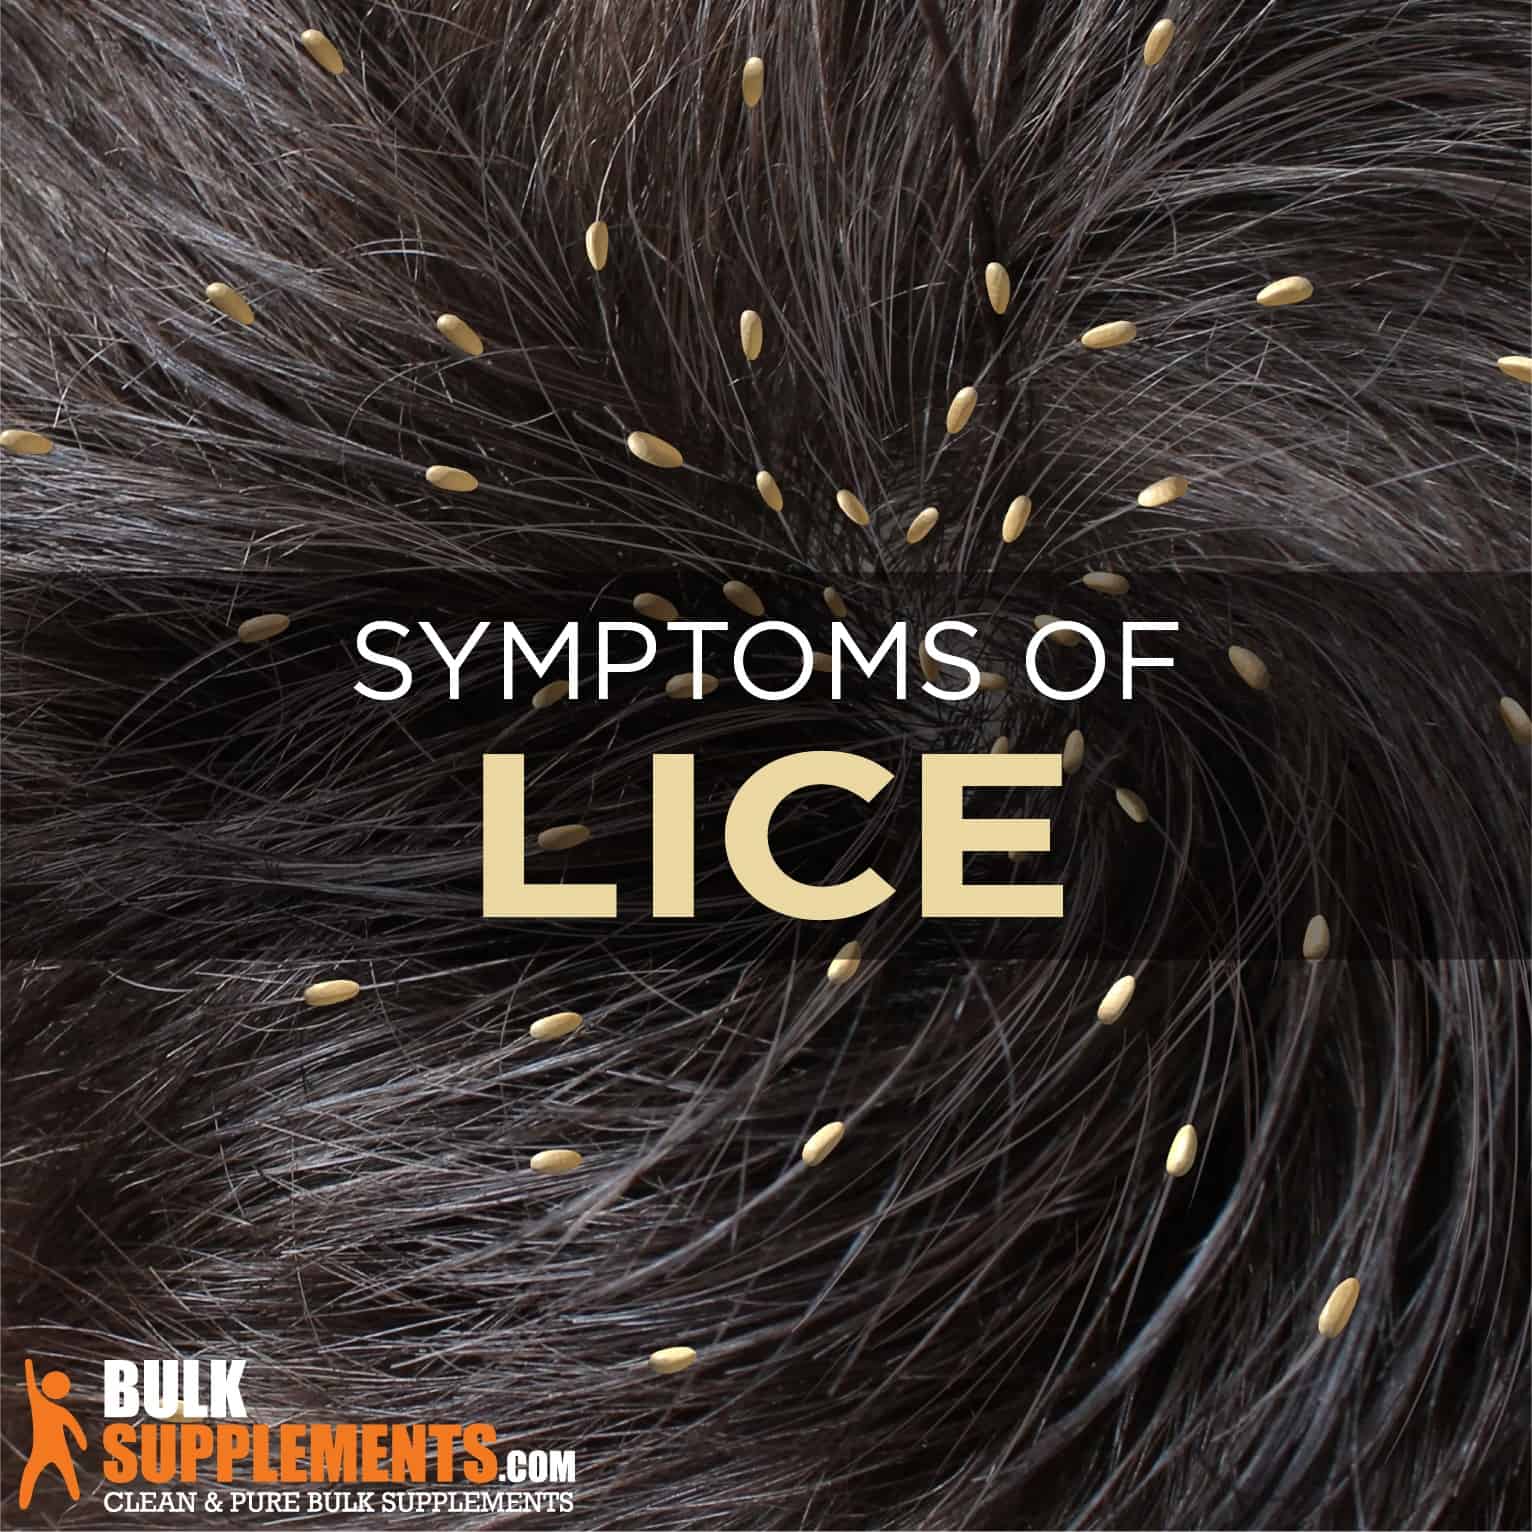 Details more than 80 causes of hair lice best - in.eteachers